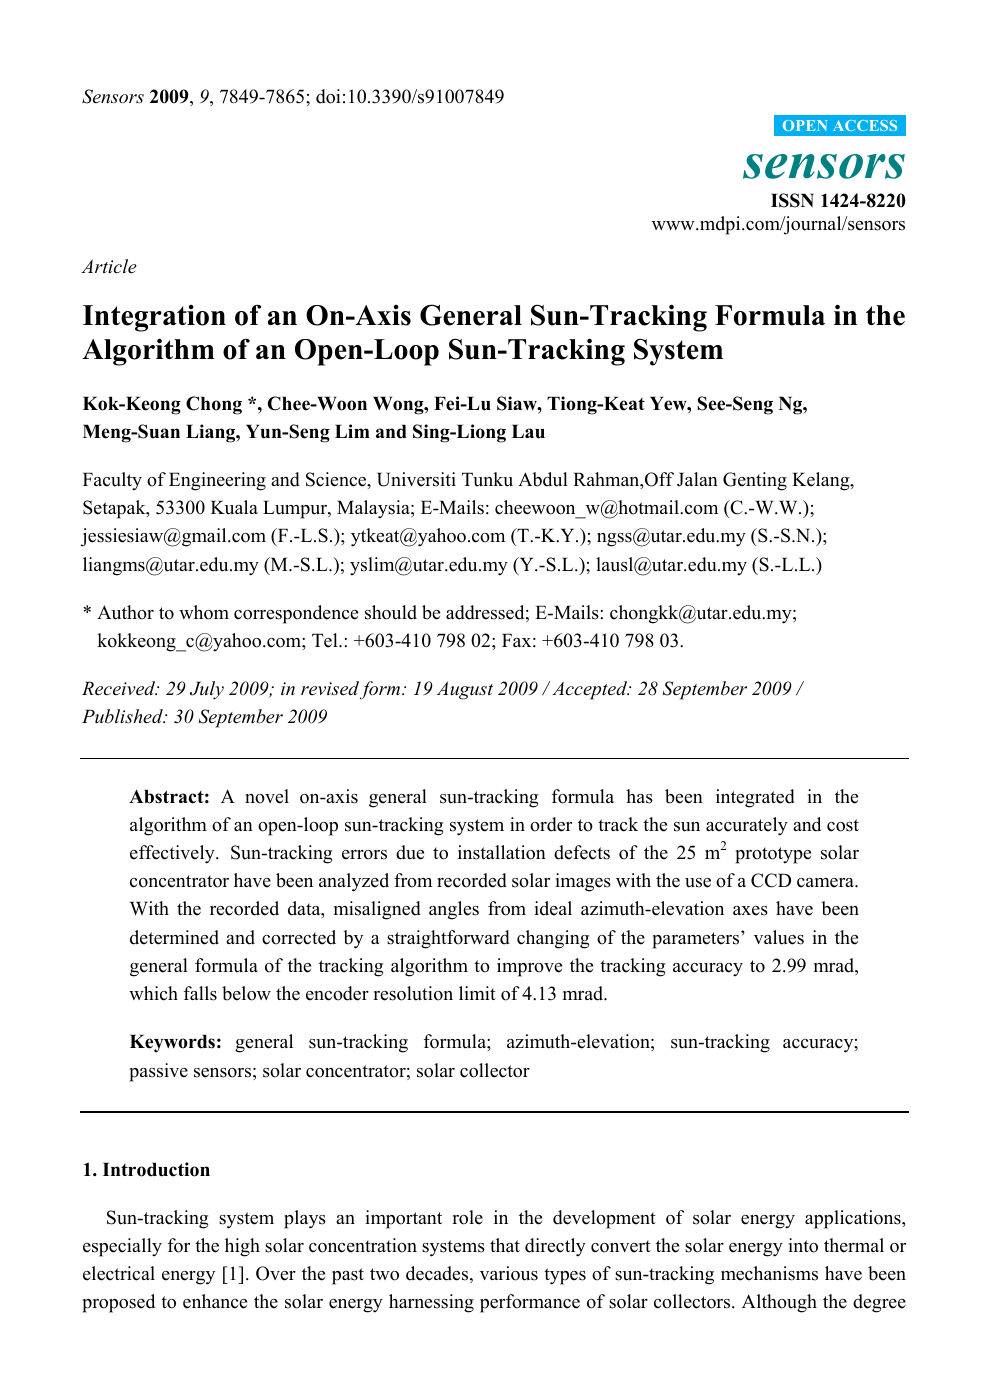 Integration Of An On Axis General Sun Tracking Formula In The Algorithm Of An Open Loop Sun Tracking System Topic Of Research Paper In Electrical Engineering Electronic Engineering Information Engineering Download Scholarly Article Pdf And